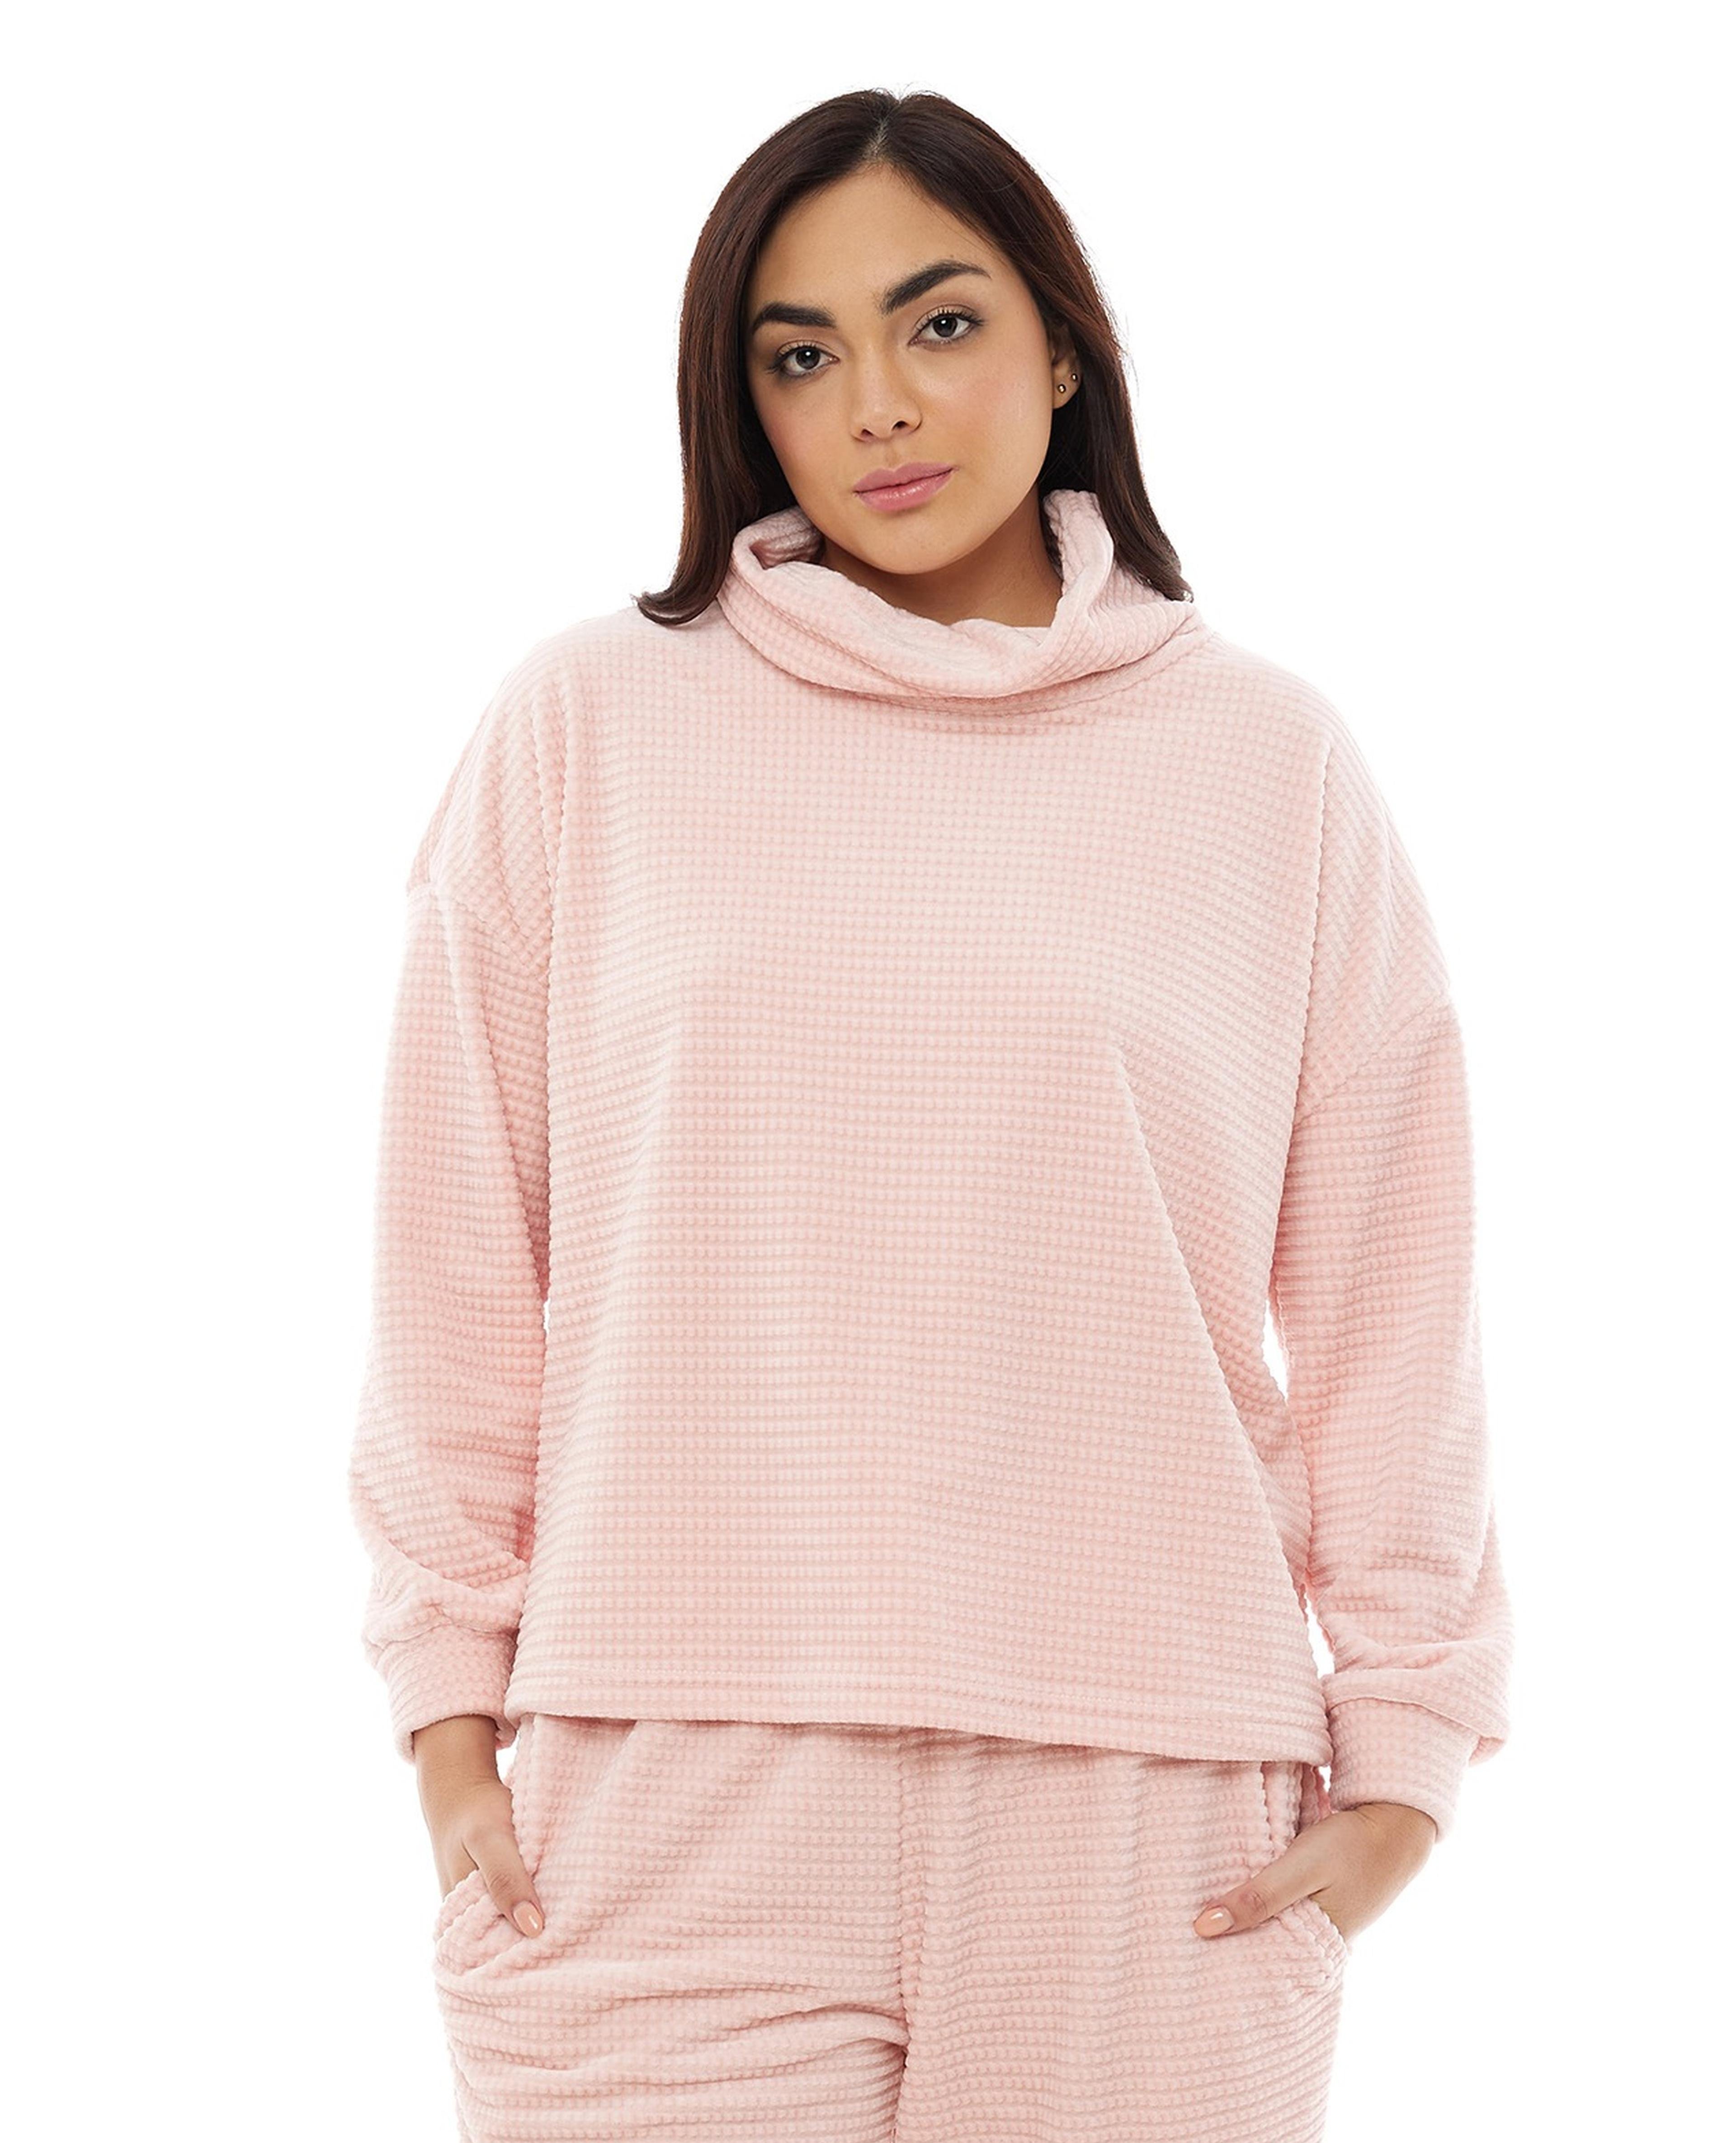 Plush Sleep Top with High Neck and Long Sleeves